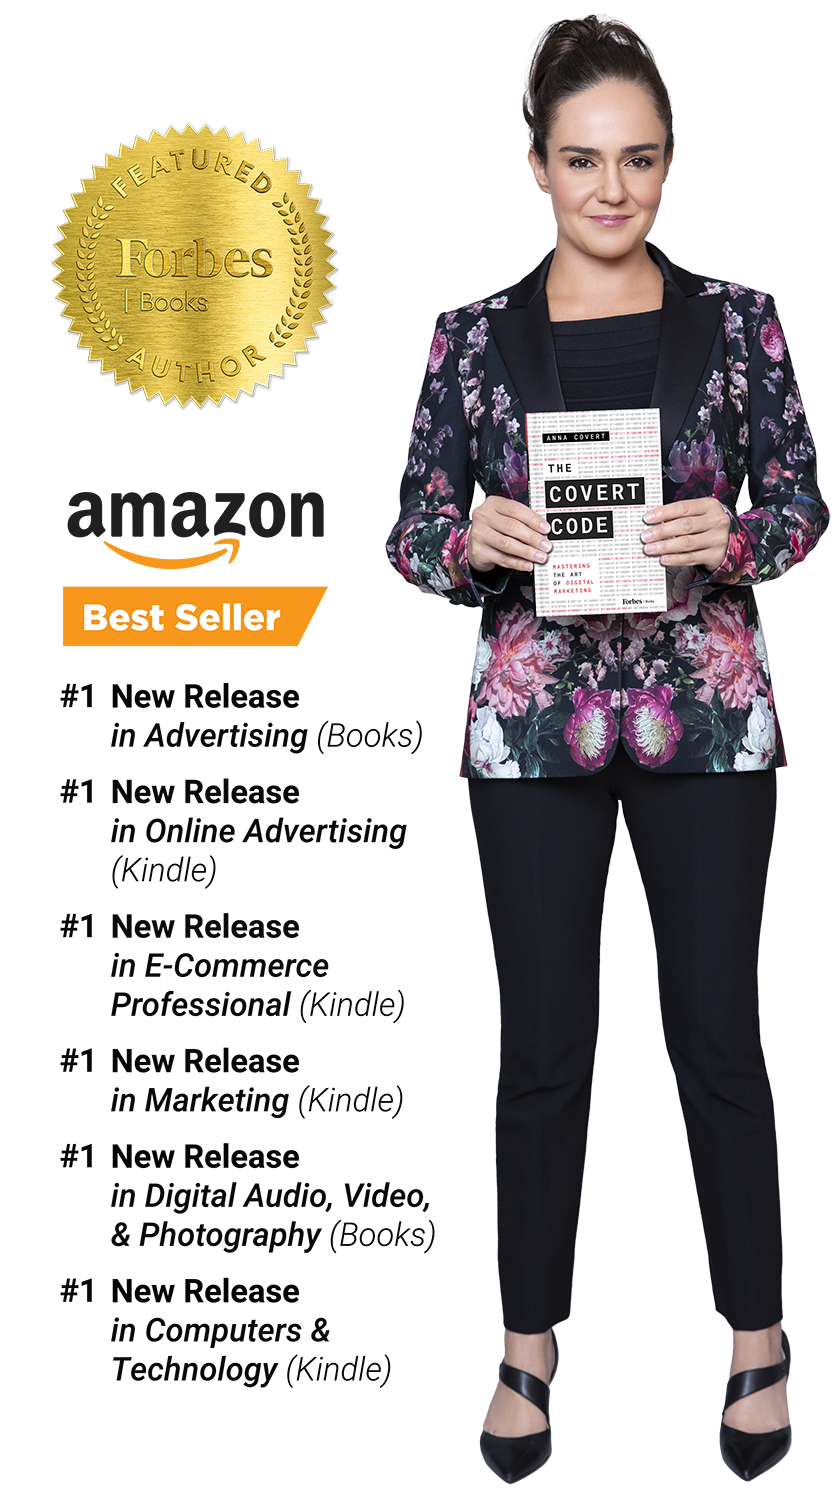 Anna Covert holding her book 'The Covert Code: Mastering the Art of Digital Marketing', standing confidently in a floral blazer and black pants. The image features badges indicating 'Forbes Books Featured Author' and 'Amazon Best Seller'.